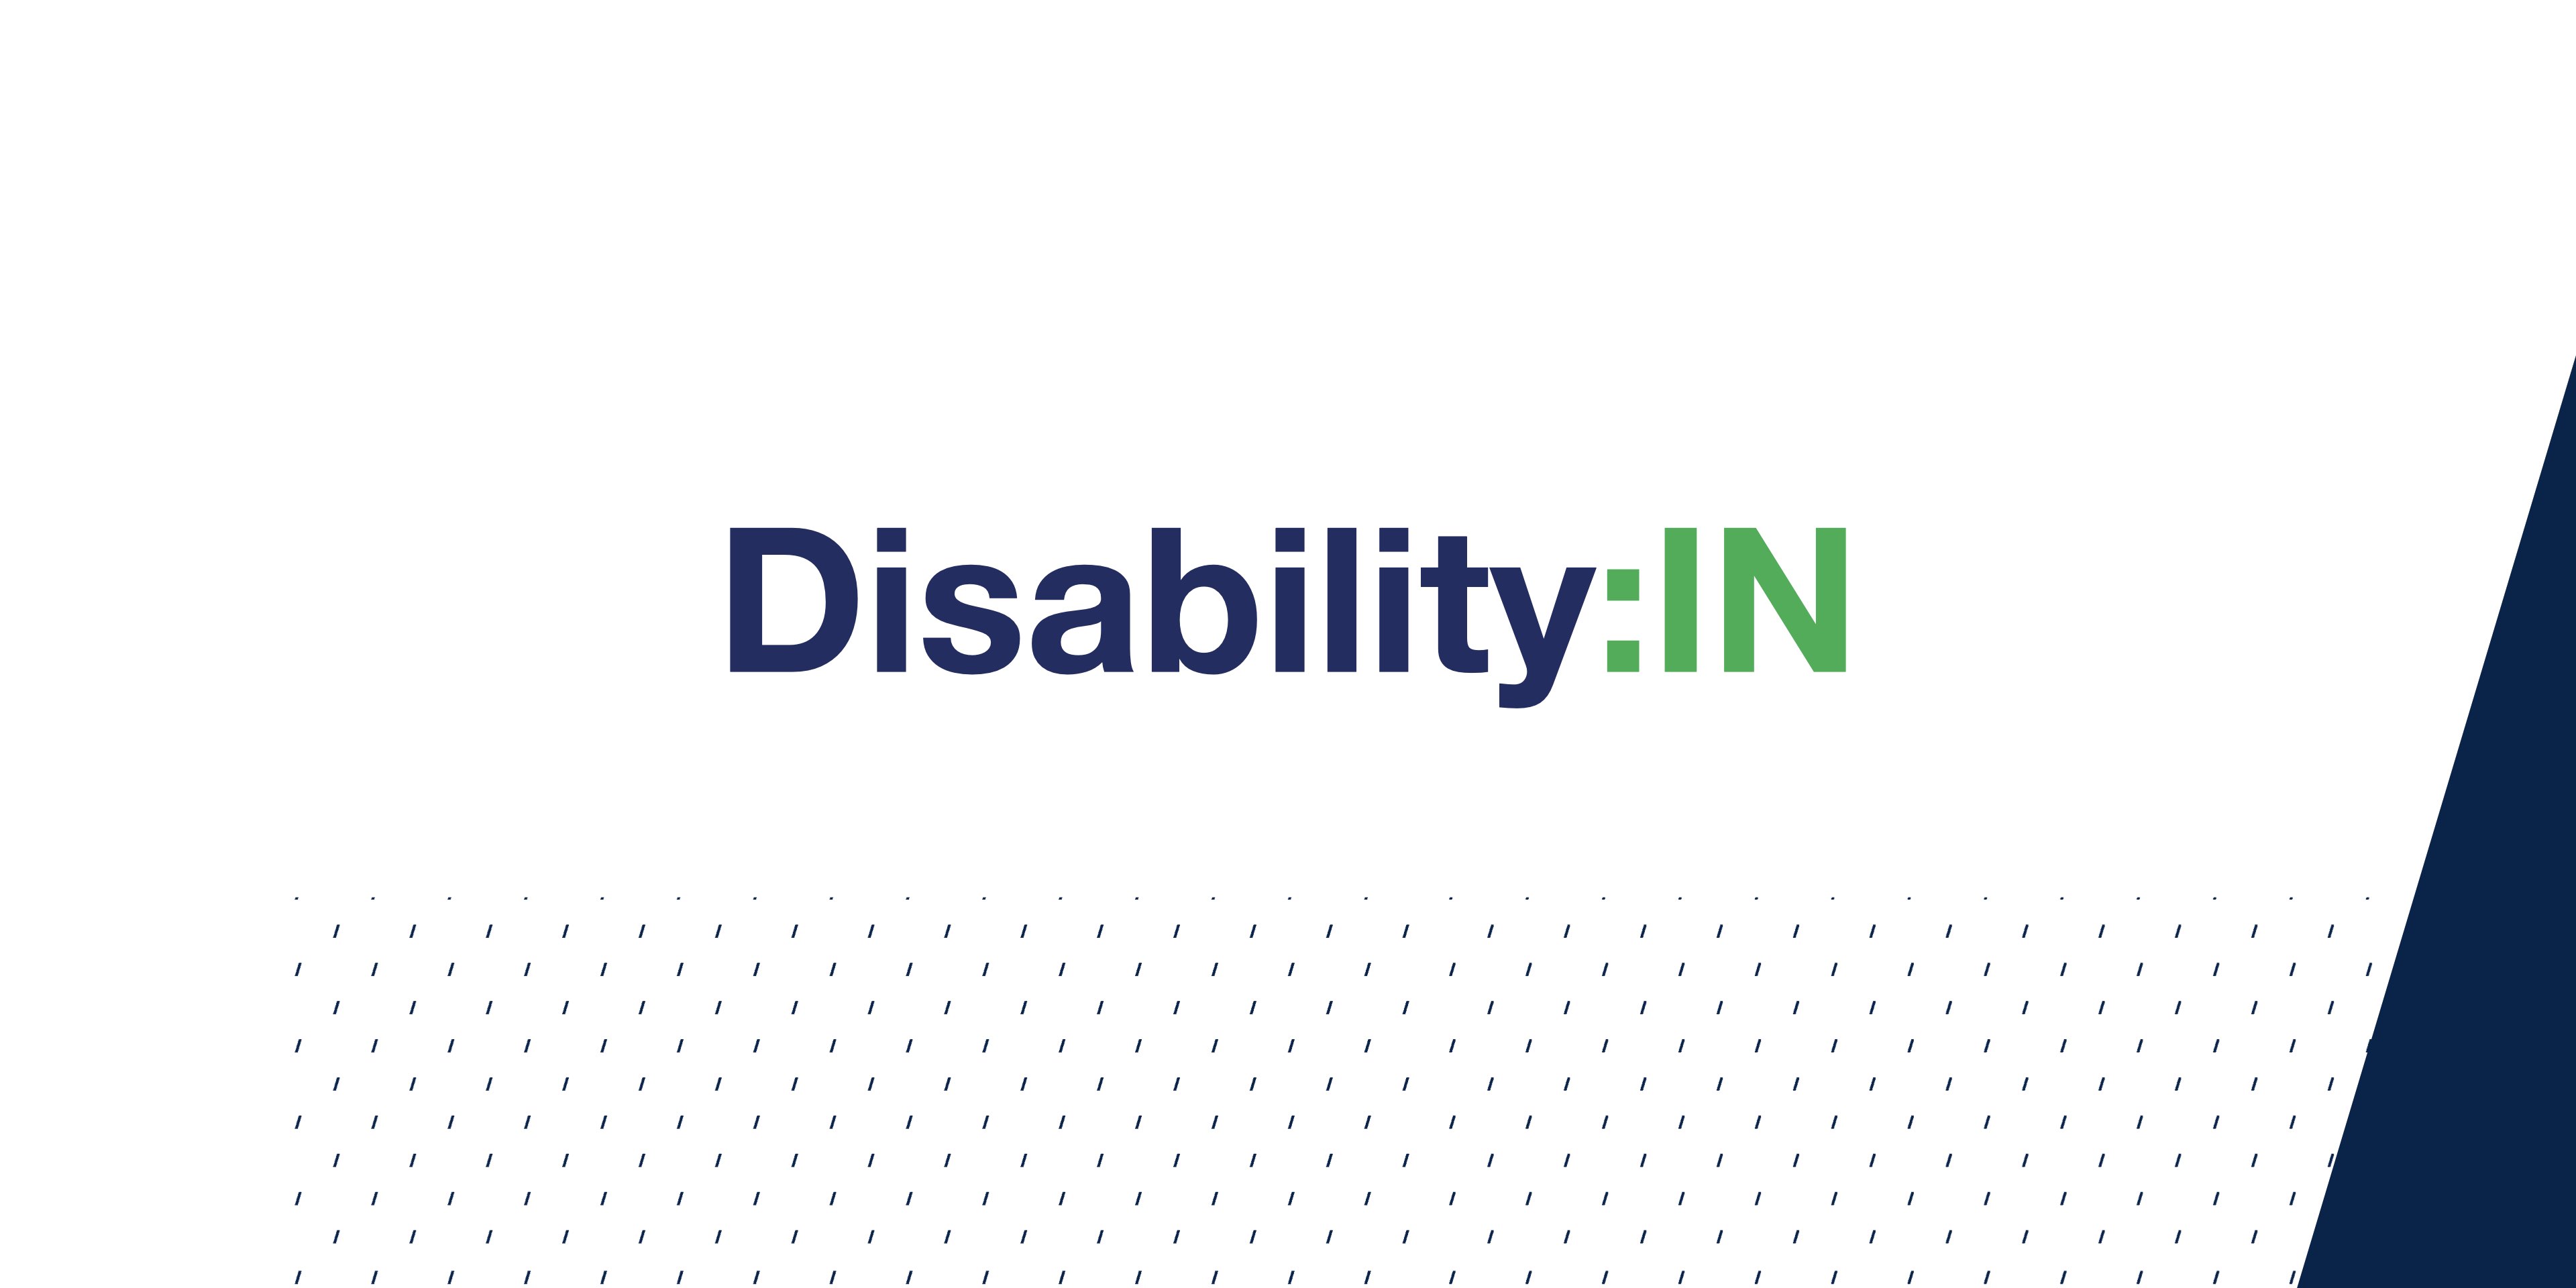 the text "disability:IN" written on a white background